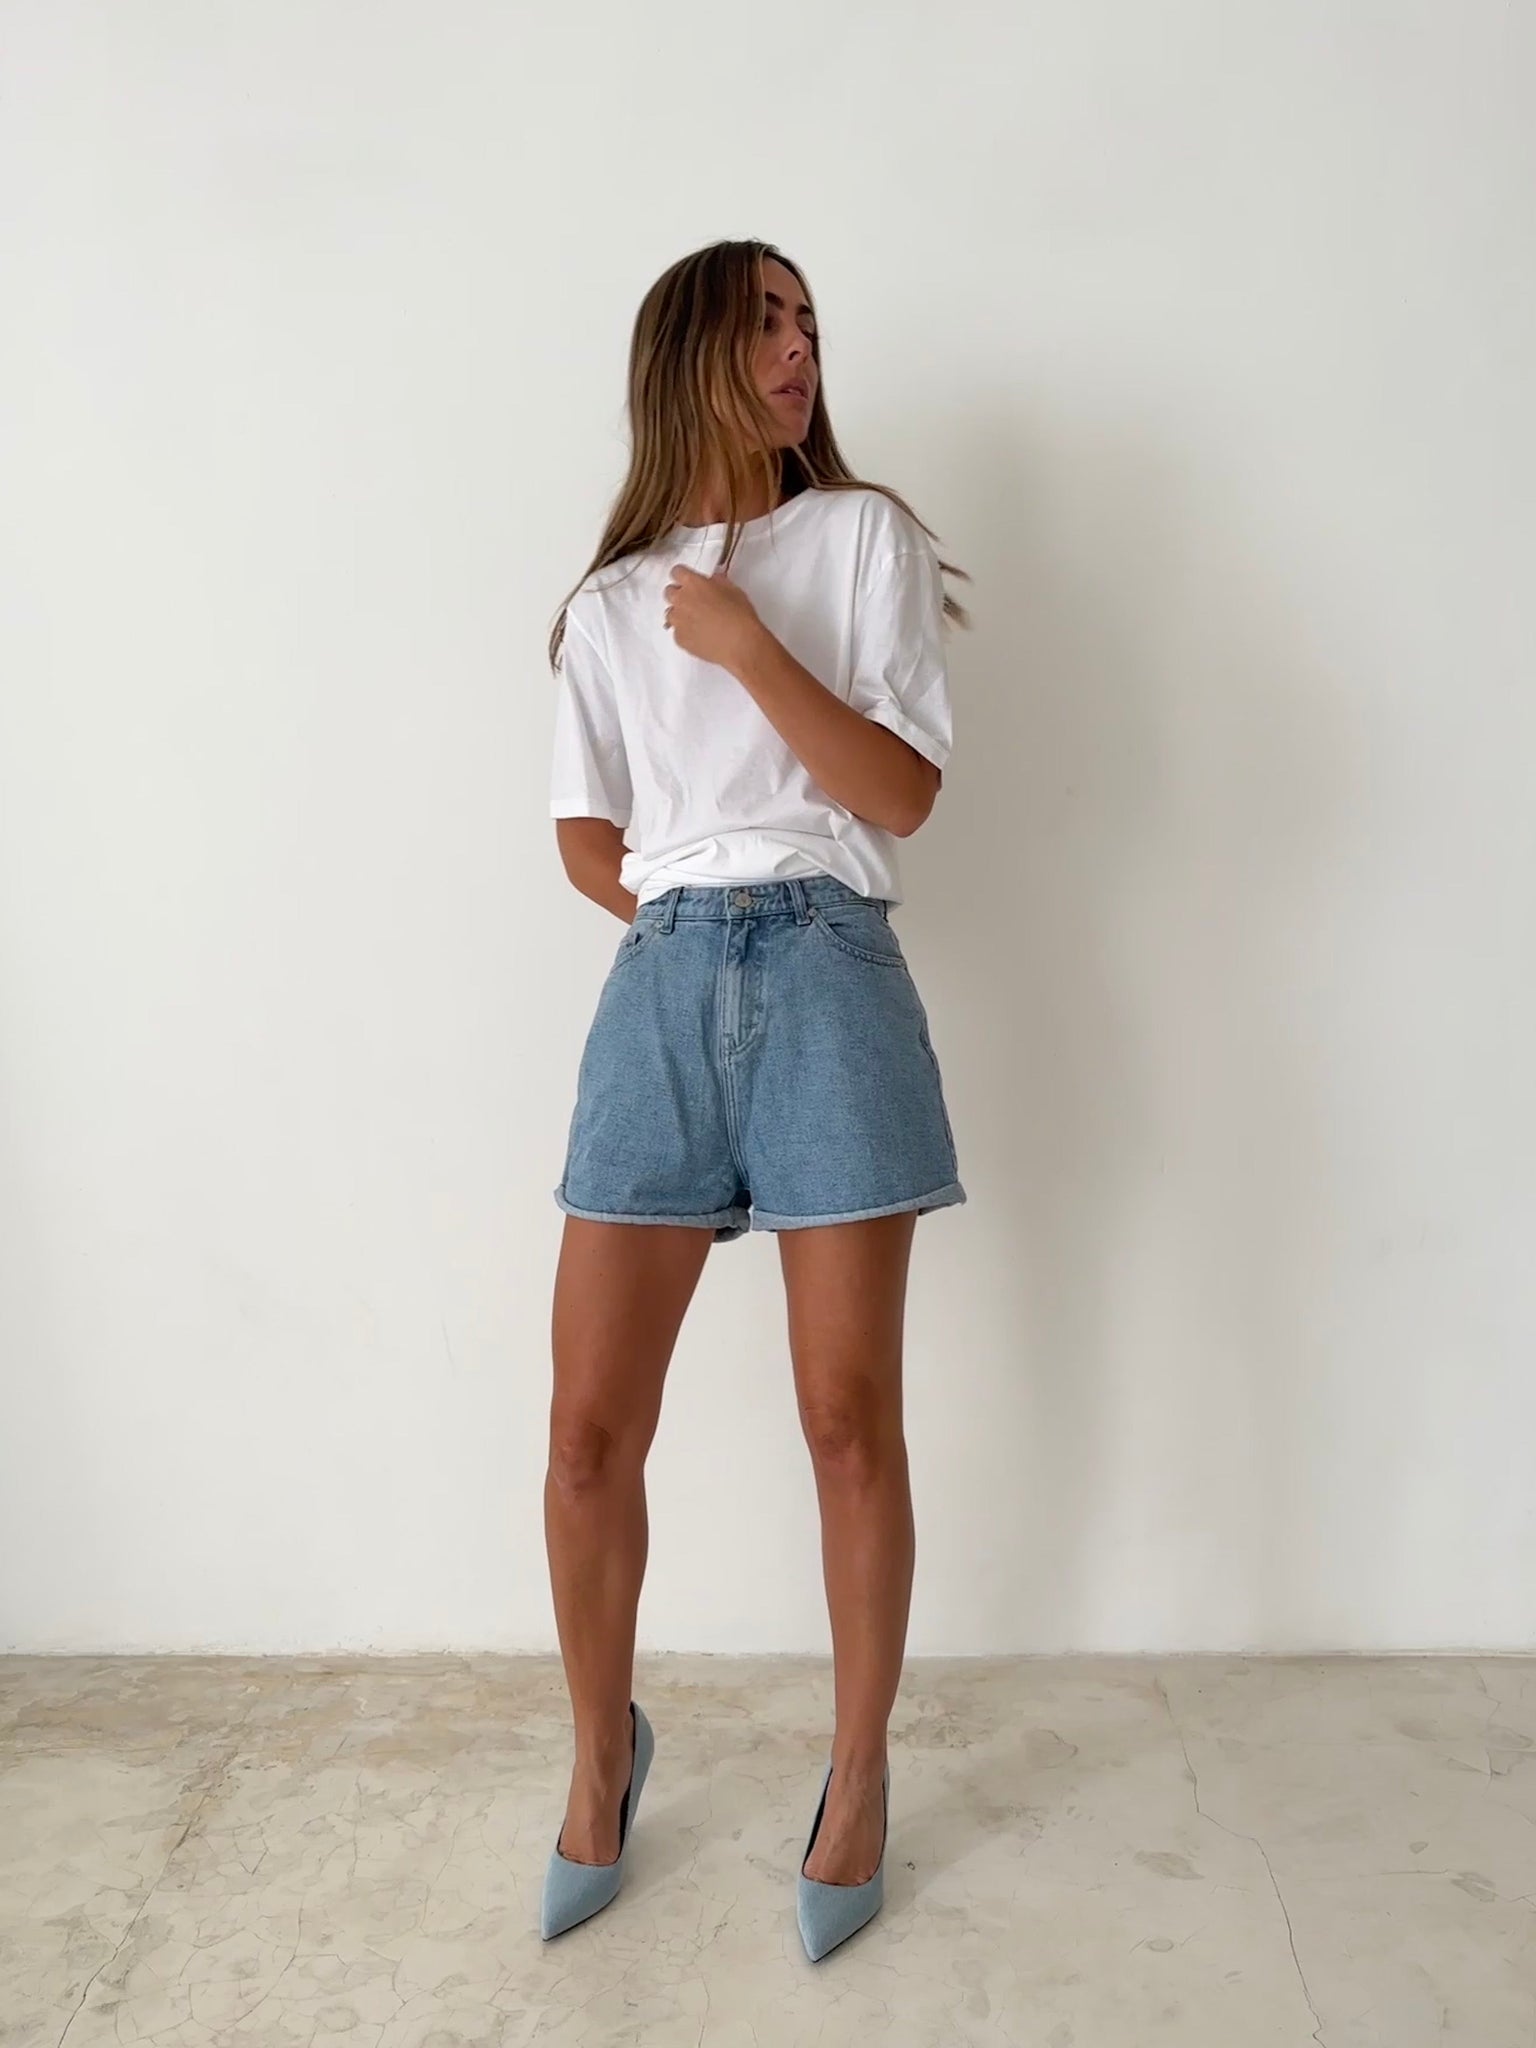 STOCK IN CANADA-ROLL UP SHORTS in MEDIUM BLUE